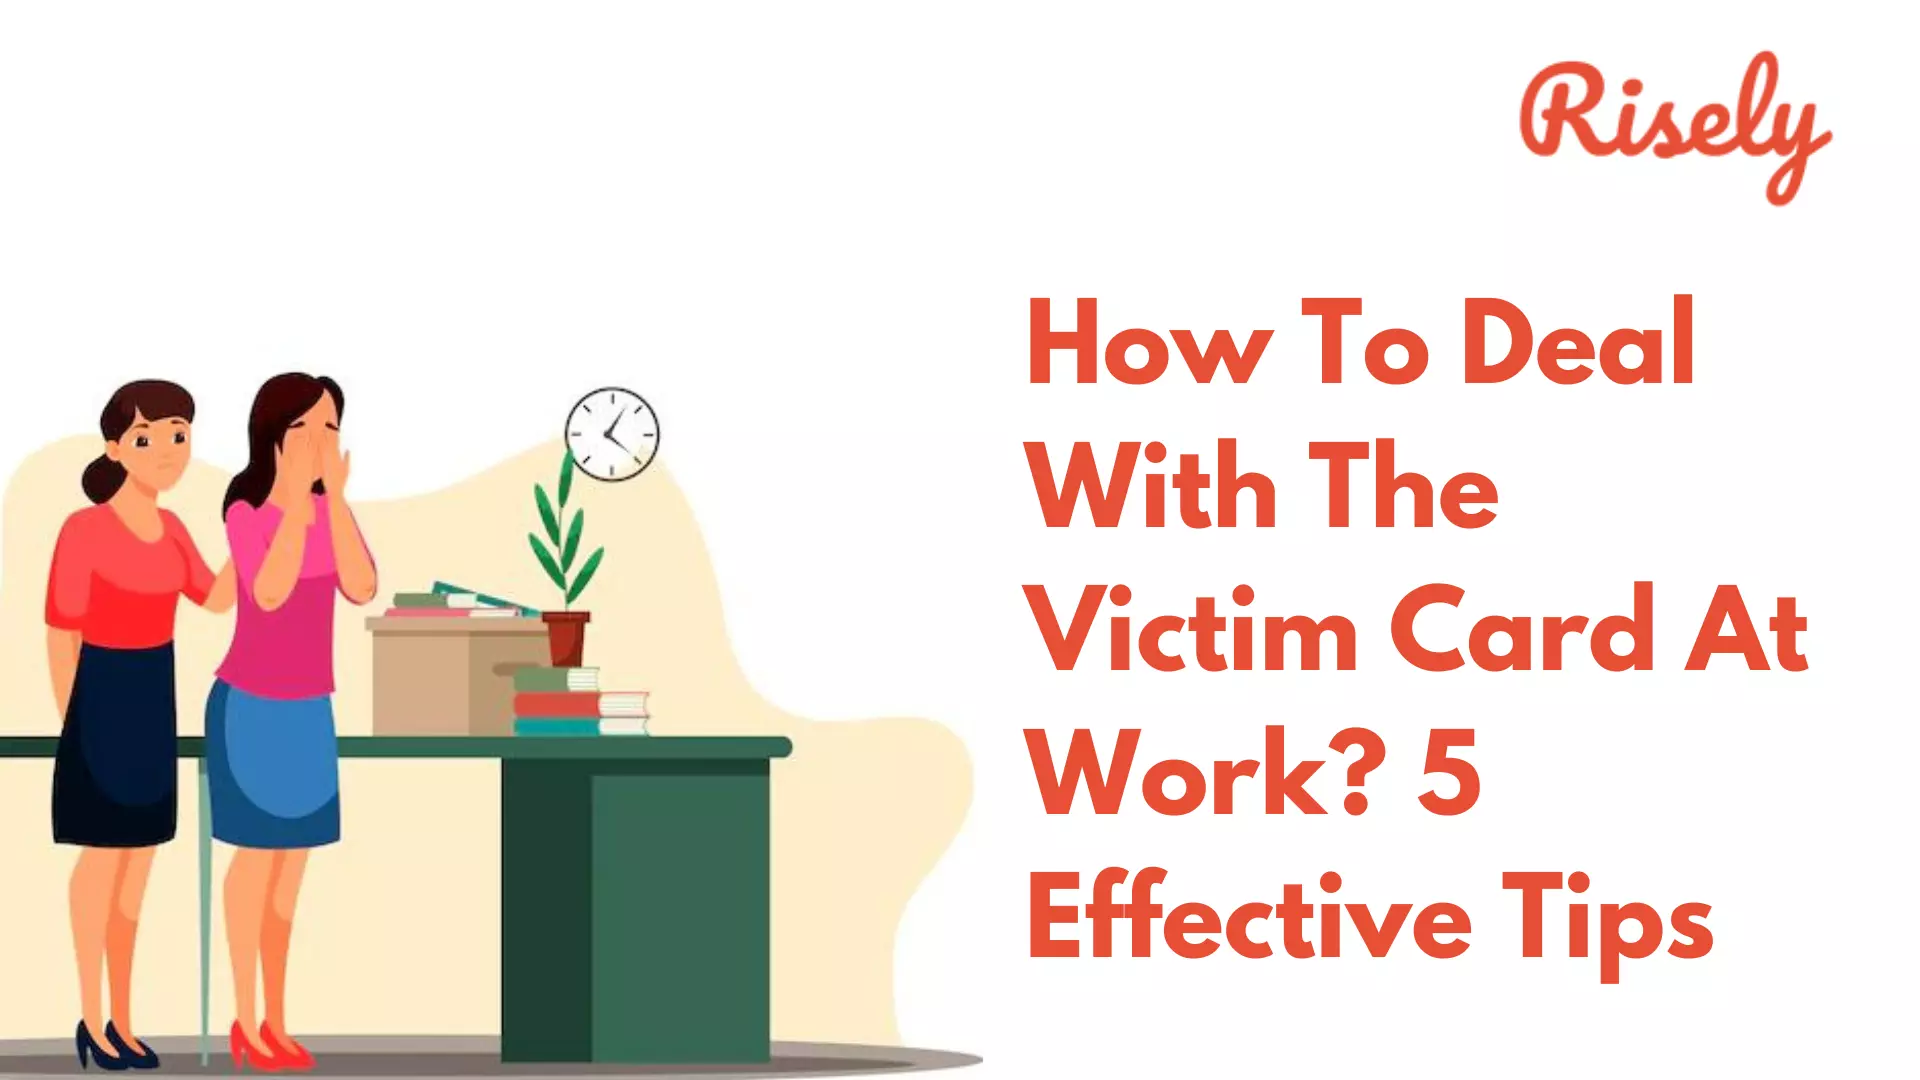 How To Deal With The Victim Card At Work? 5 Effective Tips